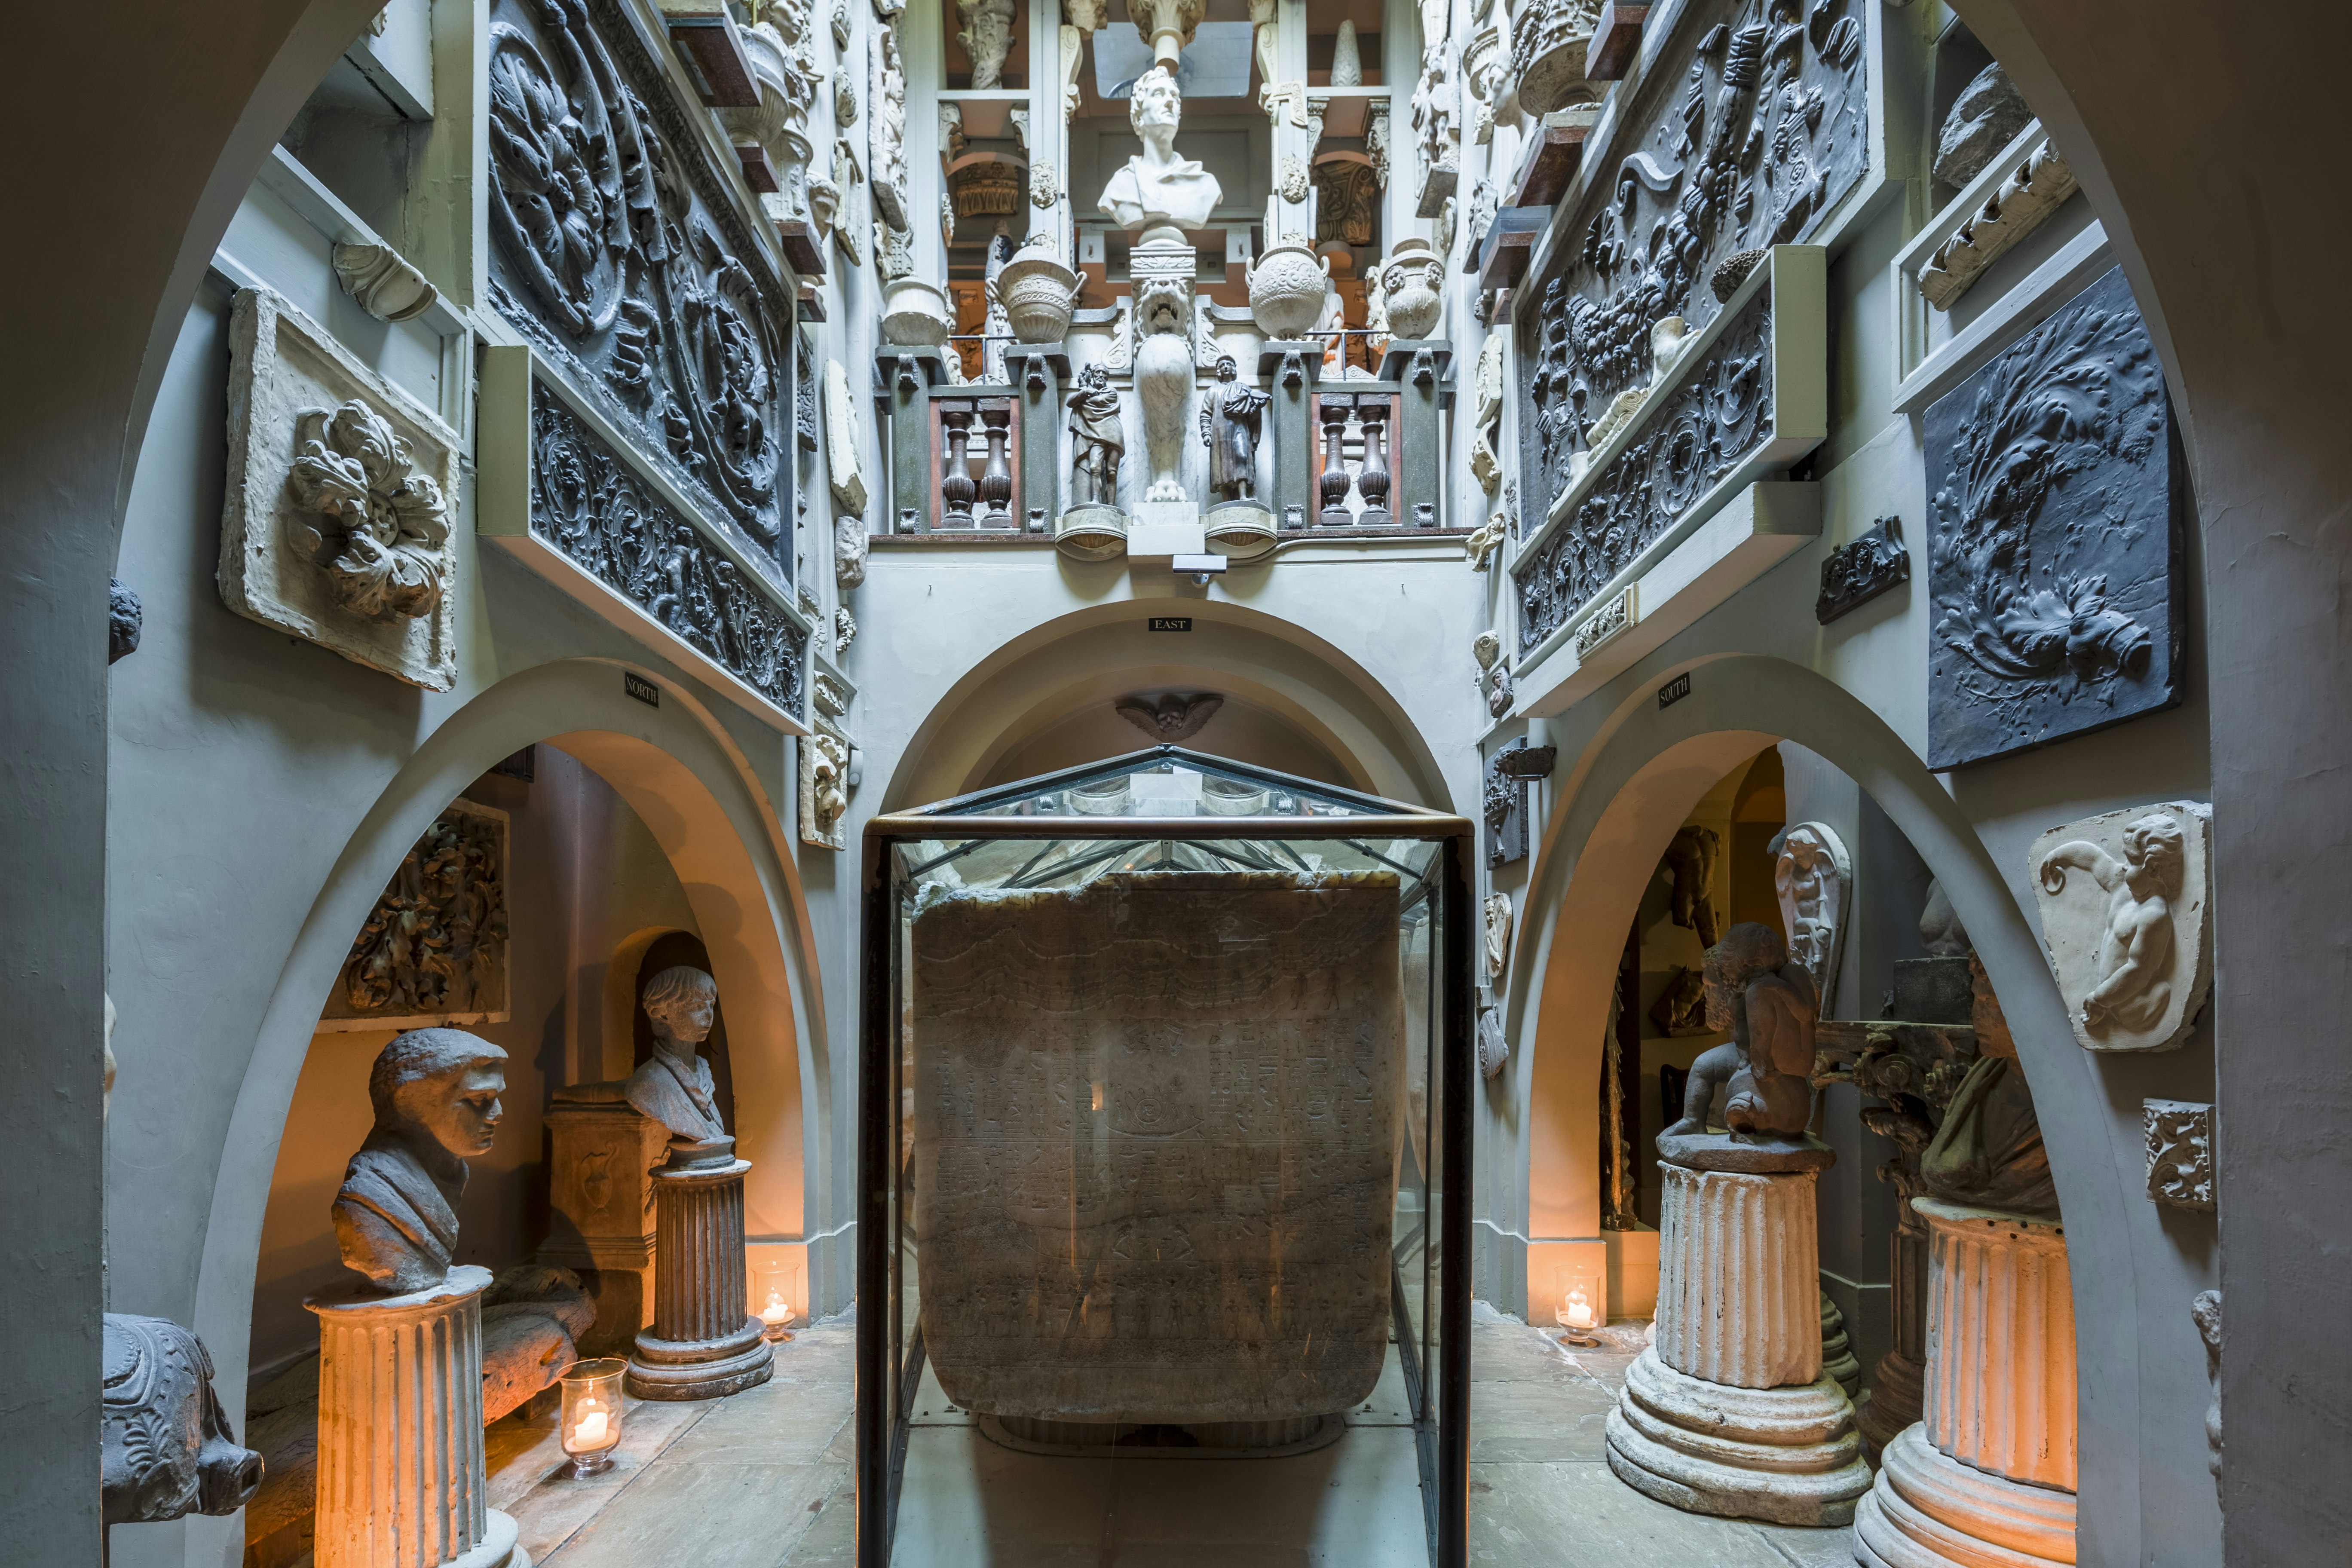 A narrow, high-ceilinged room at Sir John Soane's Museum in London. A sarcophagus in a glass case sits in the middle of the room, which is lined with plaster busts, reliefs and casts.